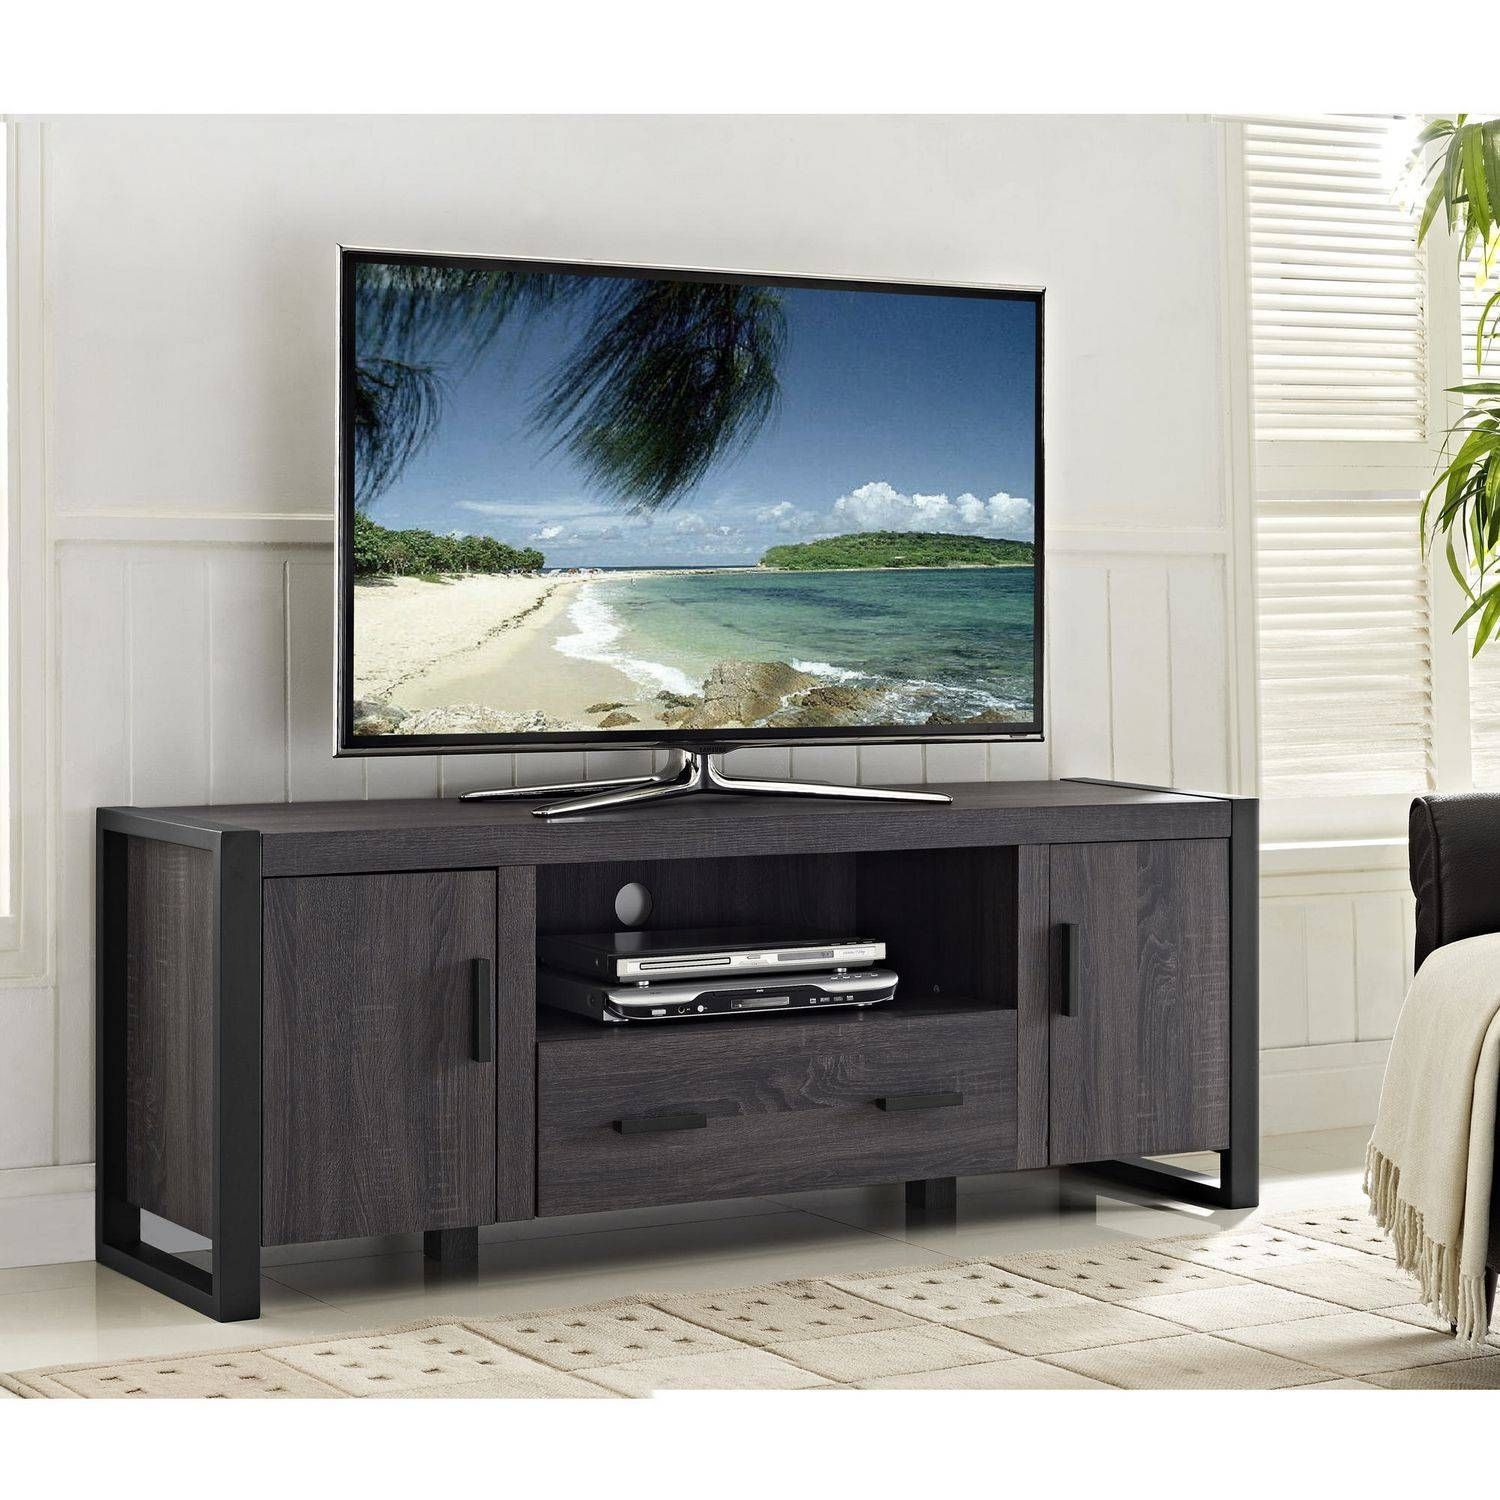 We Furniture 60" Grey Wood Tv Stand Console | Walmart Canada With Regard To Cheap Oak Tv Stands (View 15 of 15)